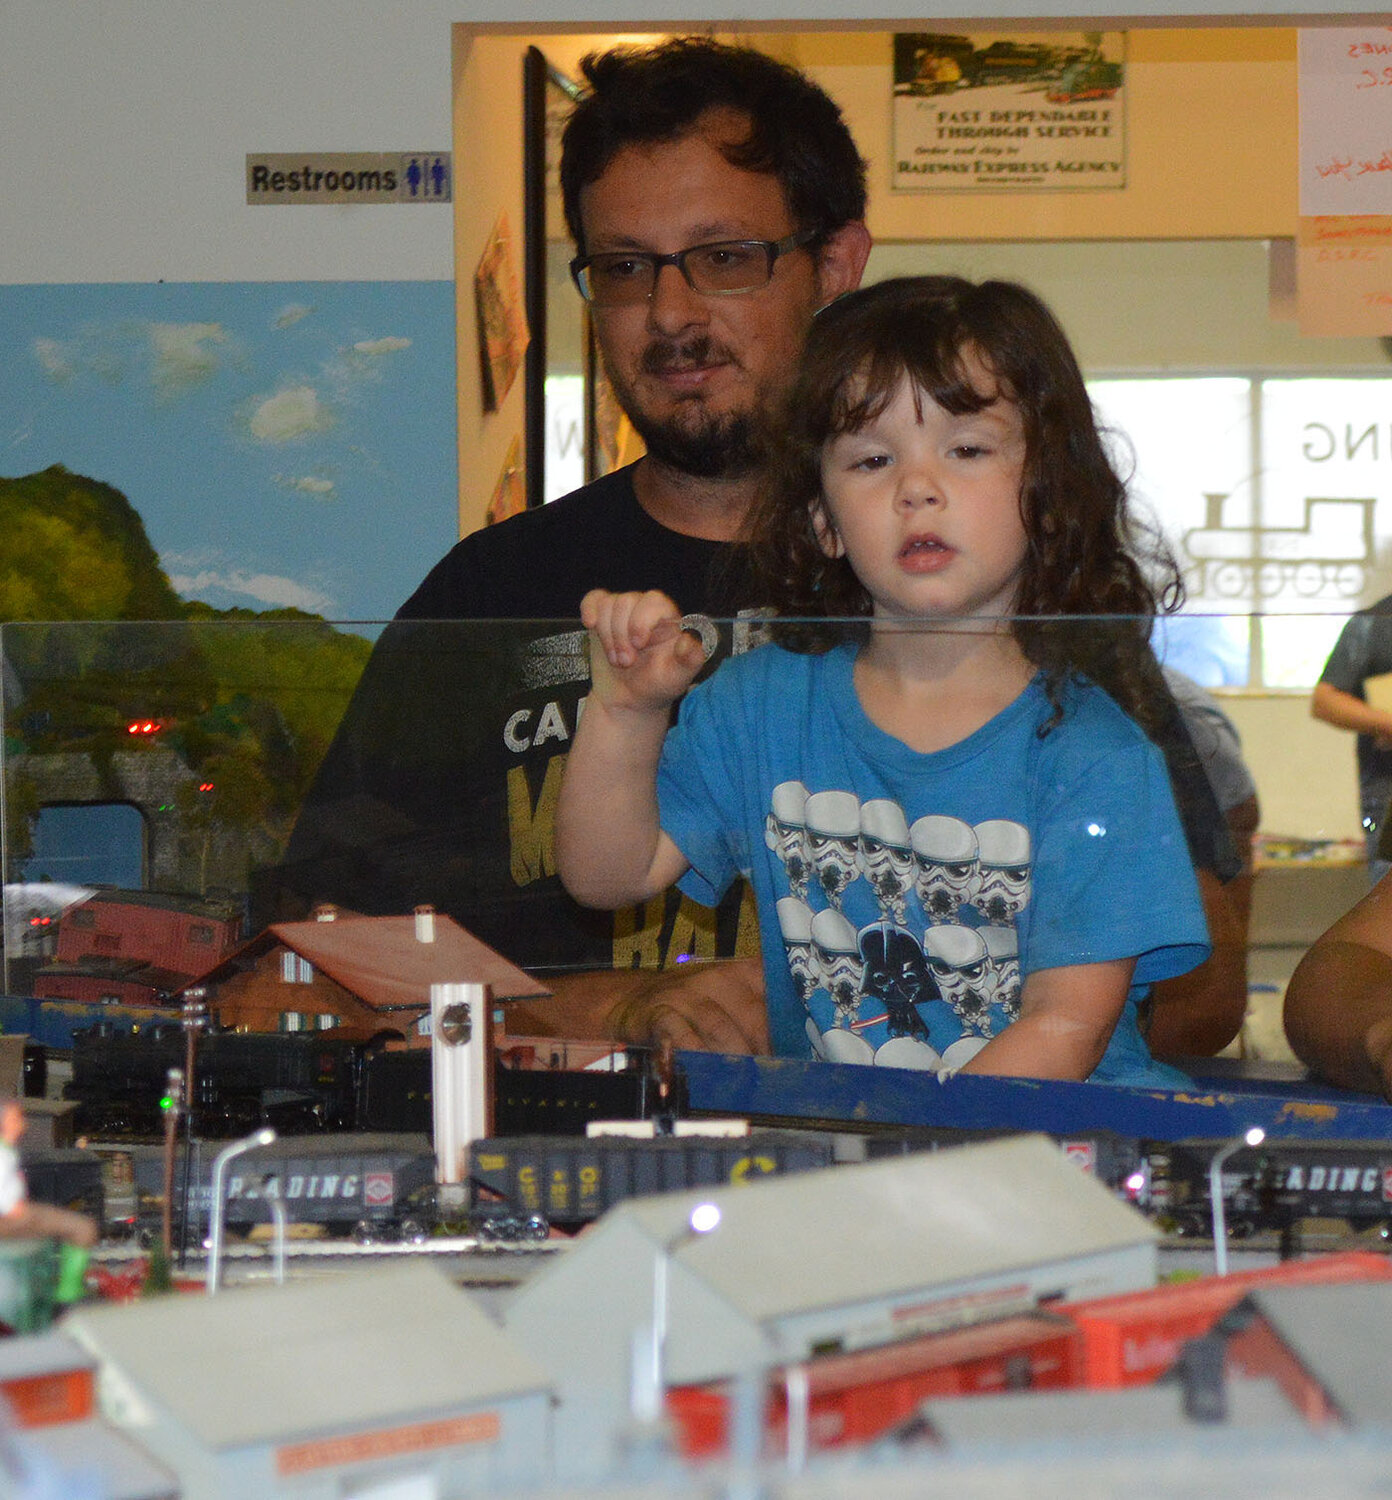 Aria Pagotta peers over the glass as she and her father, Michael Pagotta, view one of the Delaware SeaSide Railroad Club layouts.